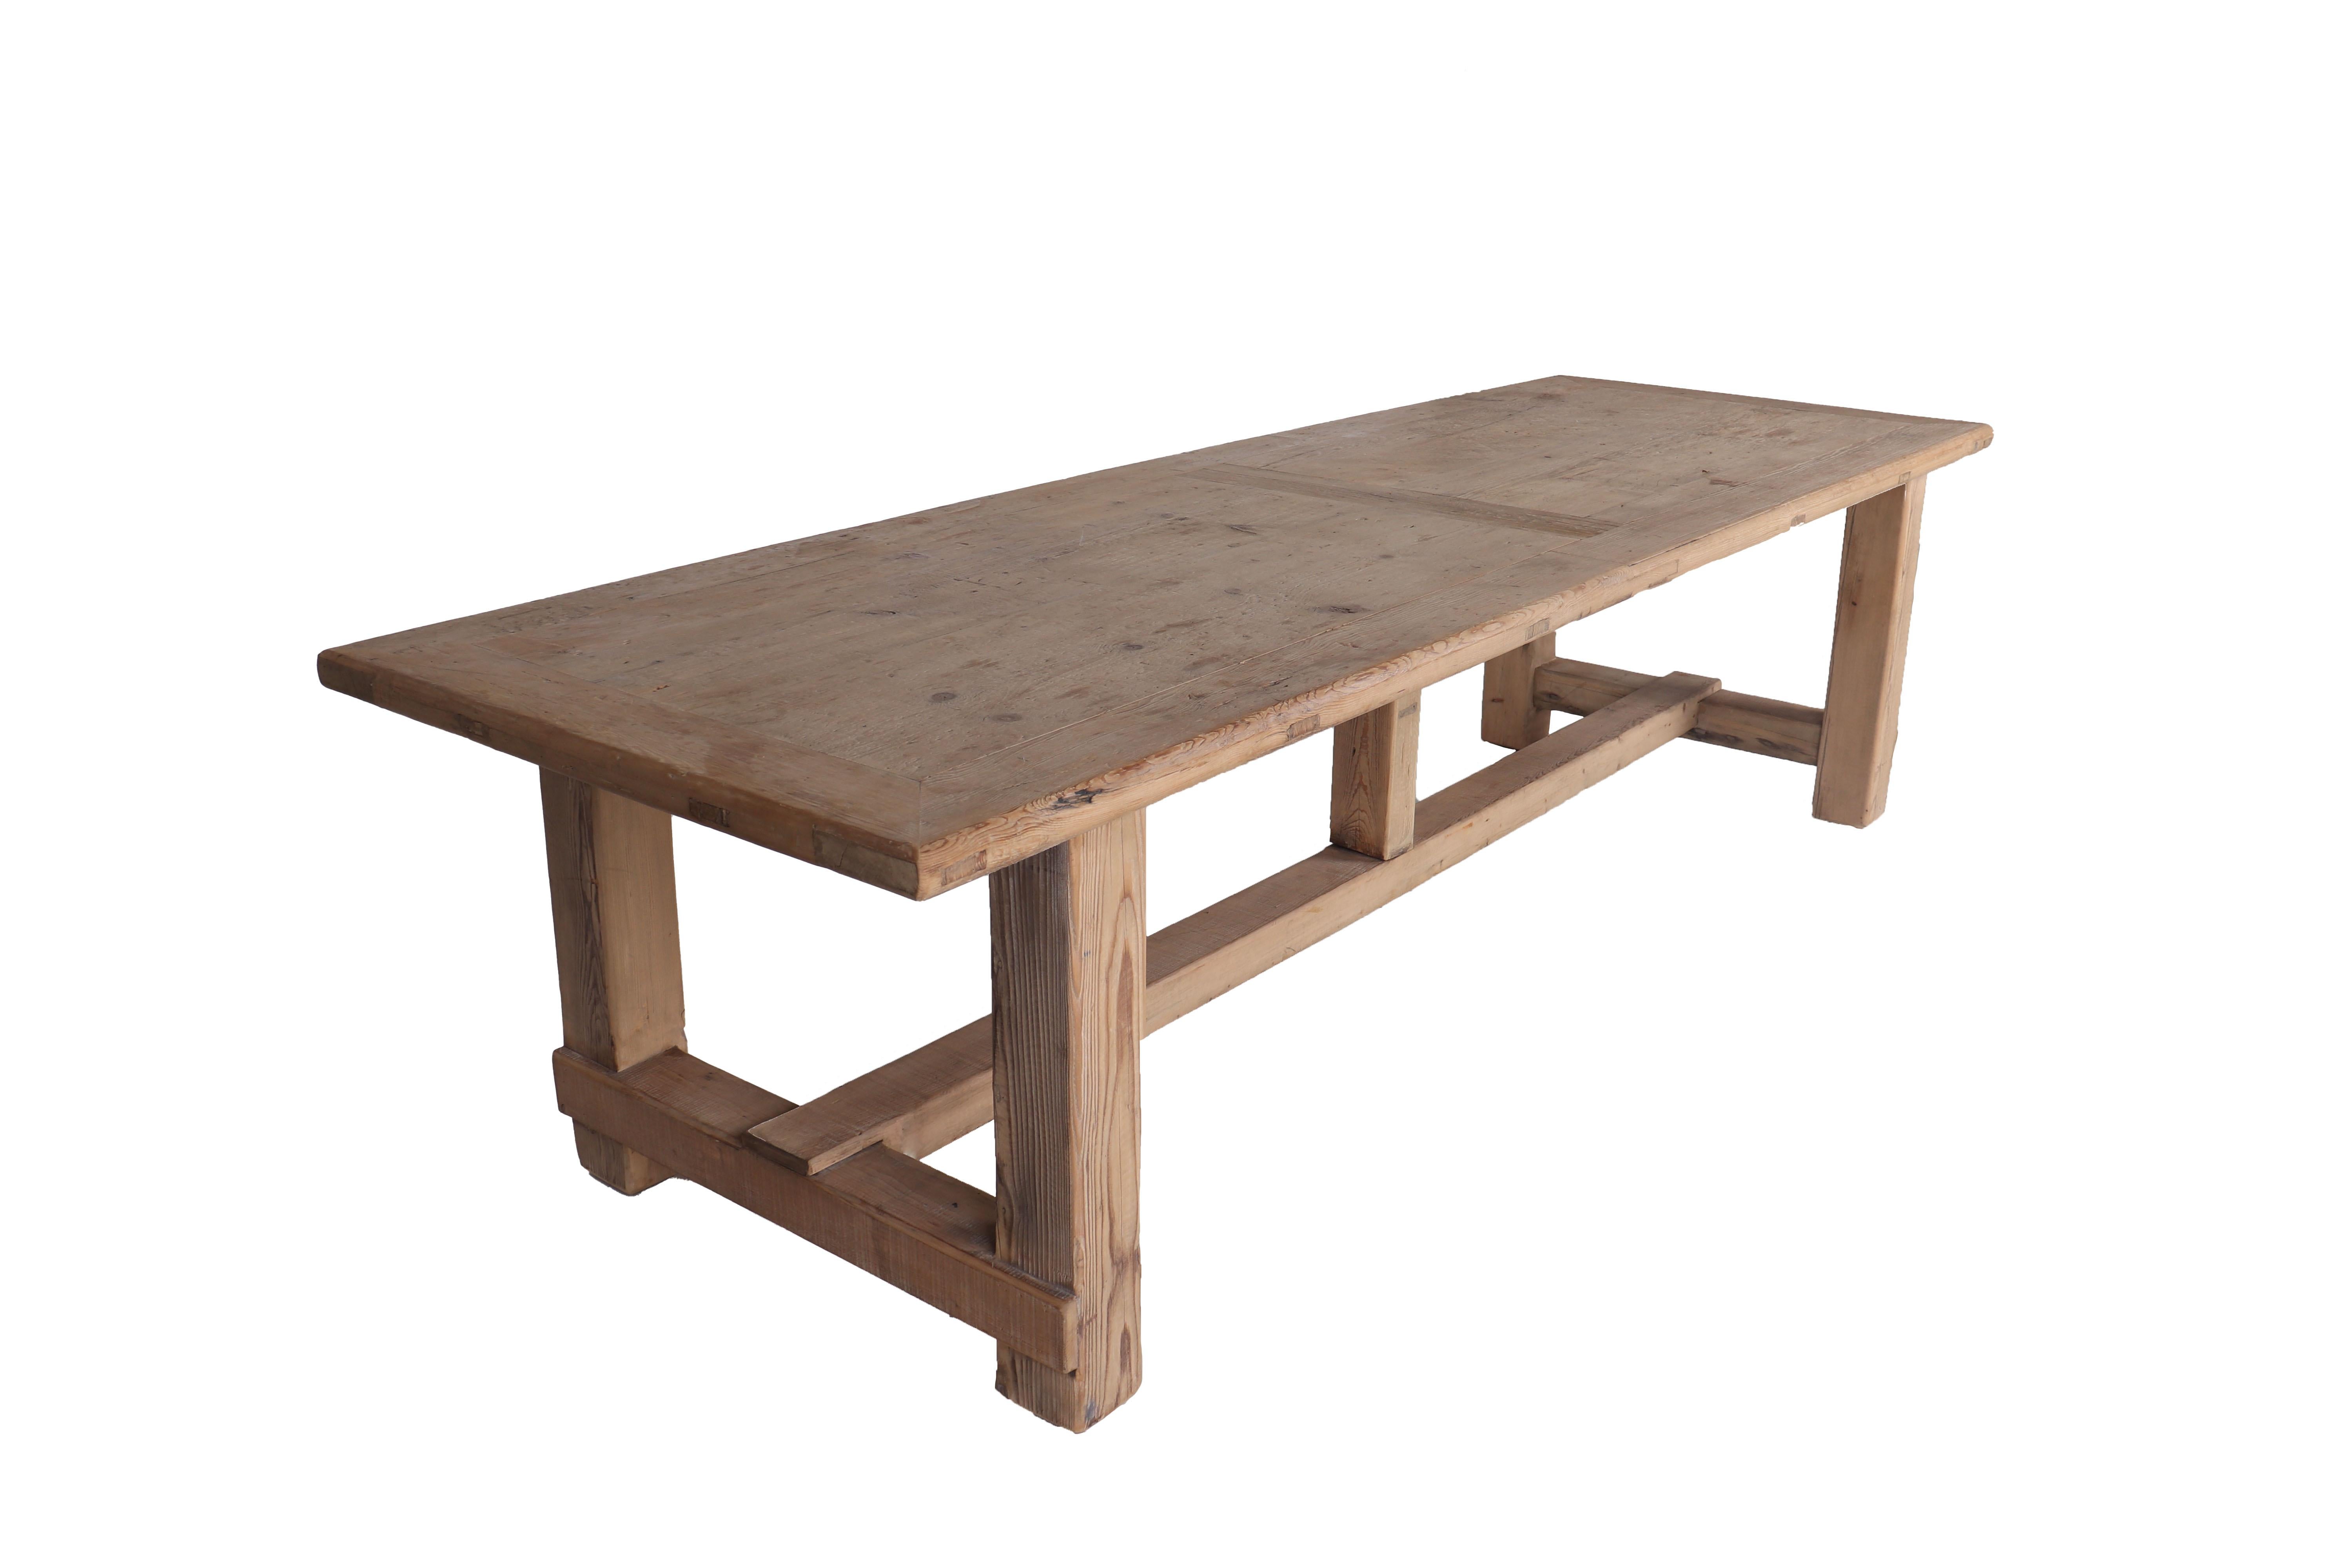 Napa farm table in reclaimed elm

Piece from our one of a kind collection, Le Monde. Exclusive to Brendan Bass. 

Globally curated by Brendan Bass, Le Monde furniture and accessories offer modern sensibility, provincial construction, and